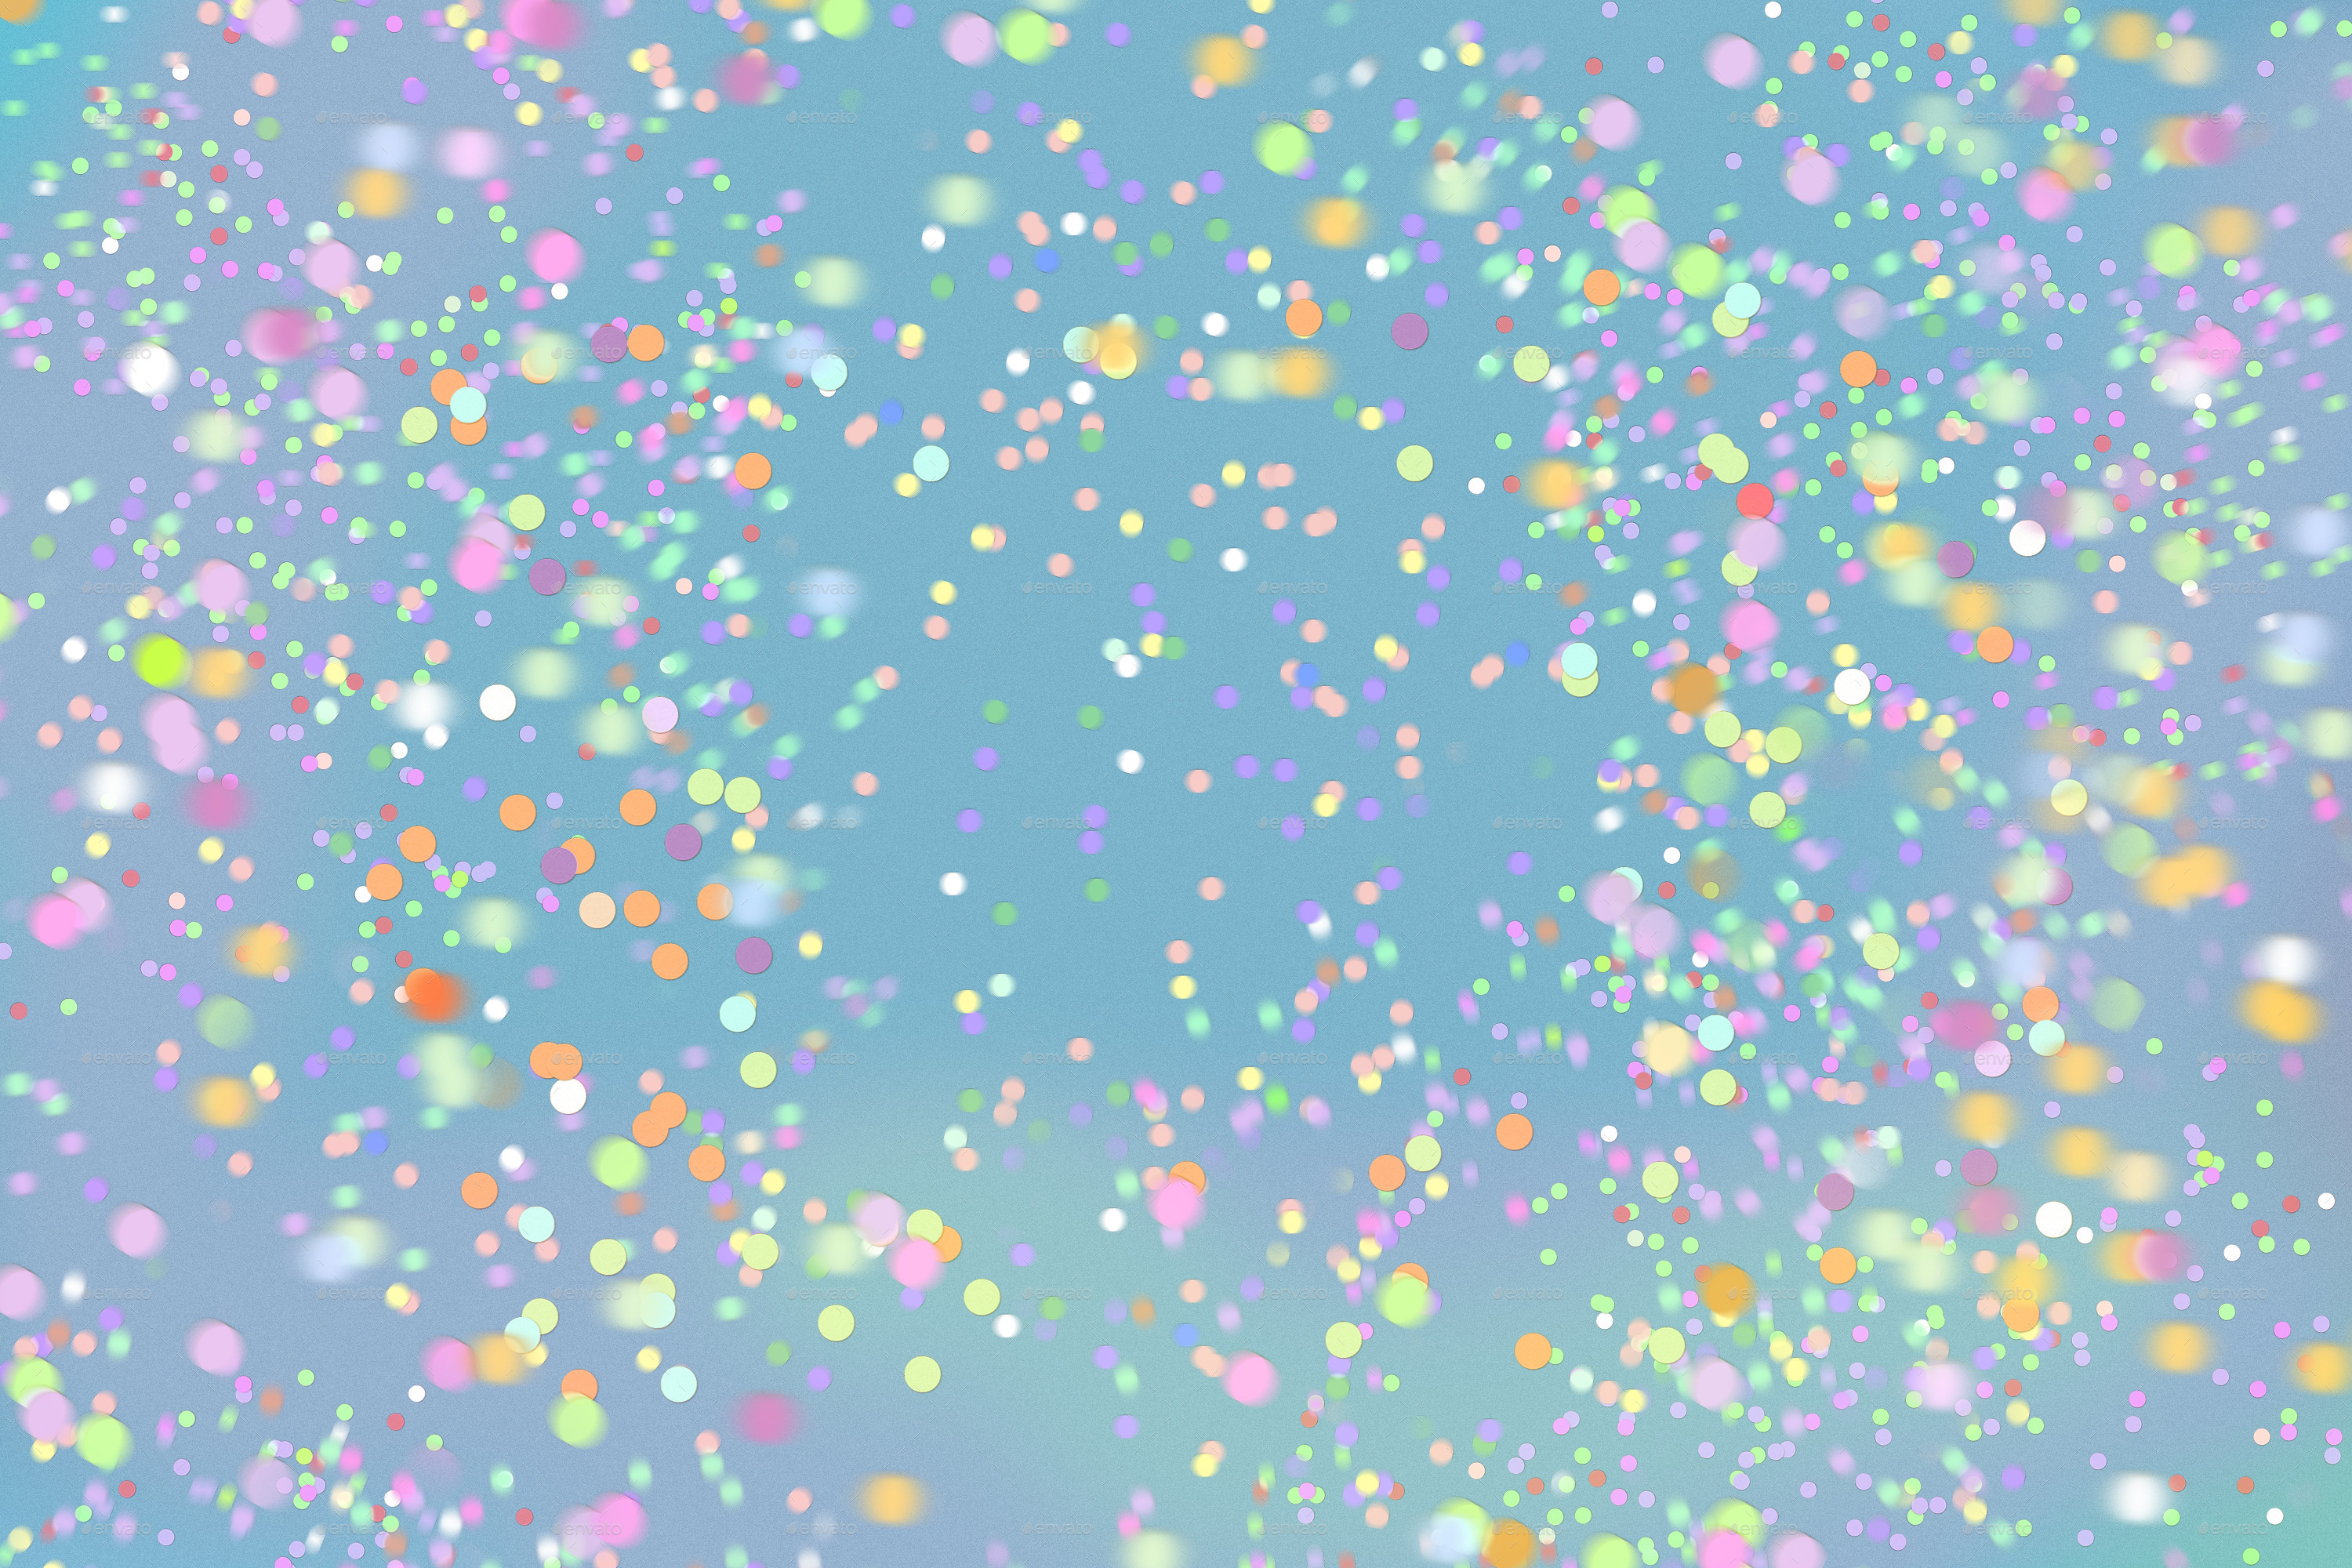 15 Confetti Backgrounds By Mapictures Graphicriver HD Wallpapers Download Free Images Wallpaper [wallpaper981.blogspot.com]